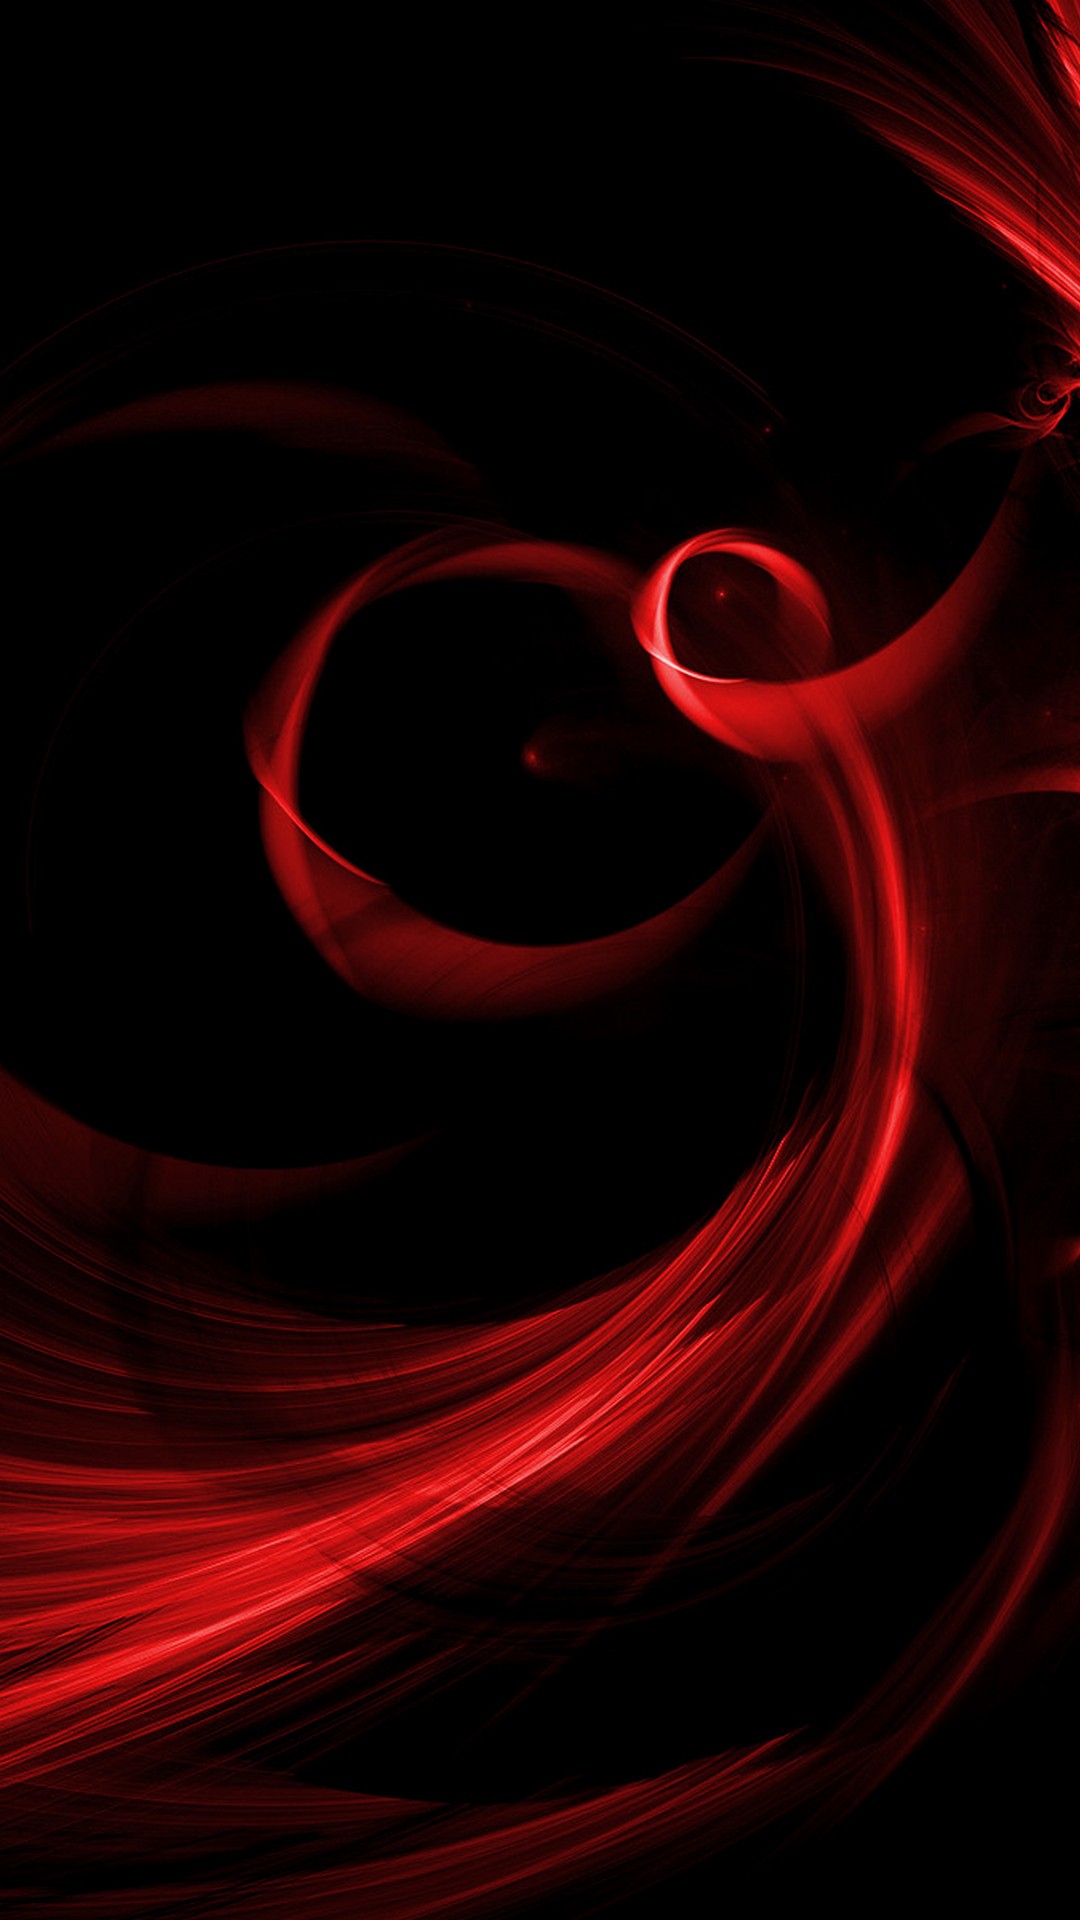 Phones Wallpaper Red Aesthetic with high-resolution 1080x1920 pixel. Download all Mobile Wallpapers and Use them as wallpapers for your iPhone, Tablet, iPad, Android and other mobile devices